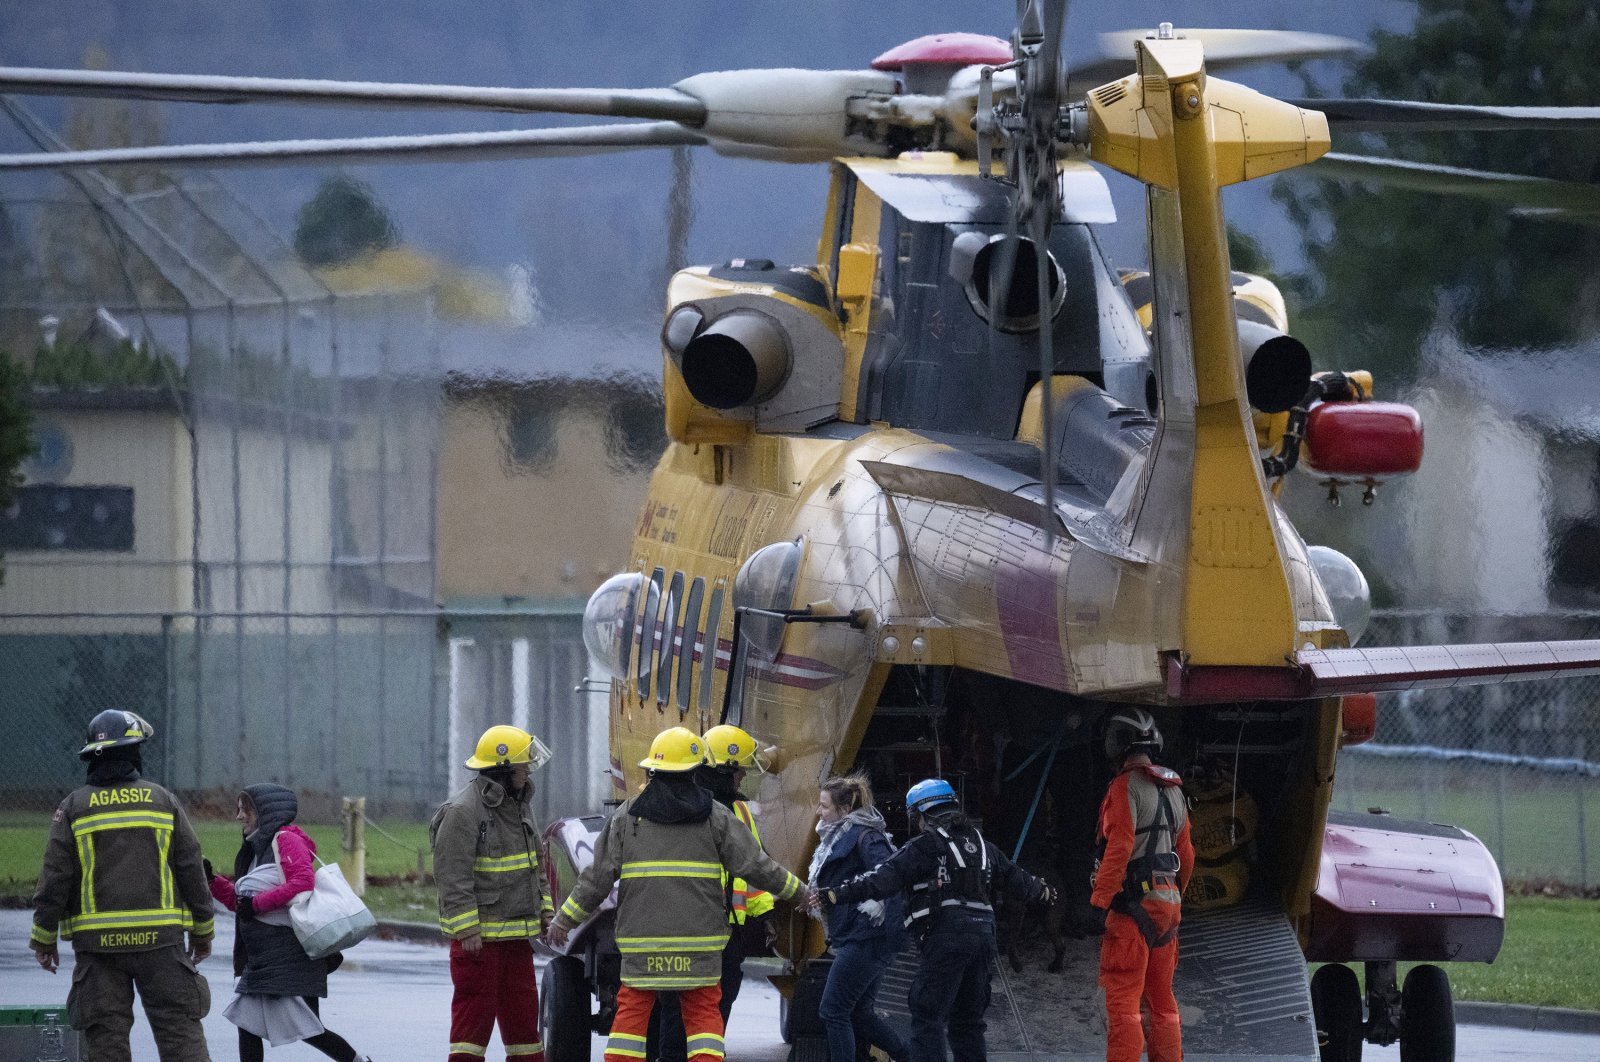 Search and rescue personnel help flood evacuees disembark from a helicopter in Agassiz, British Columbia, Monday, Nov. 15, 2021. (Jonathan Hayward/The Canadian Press via AP)